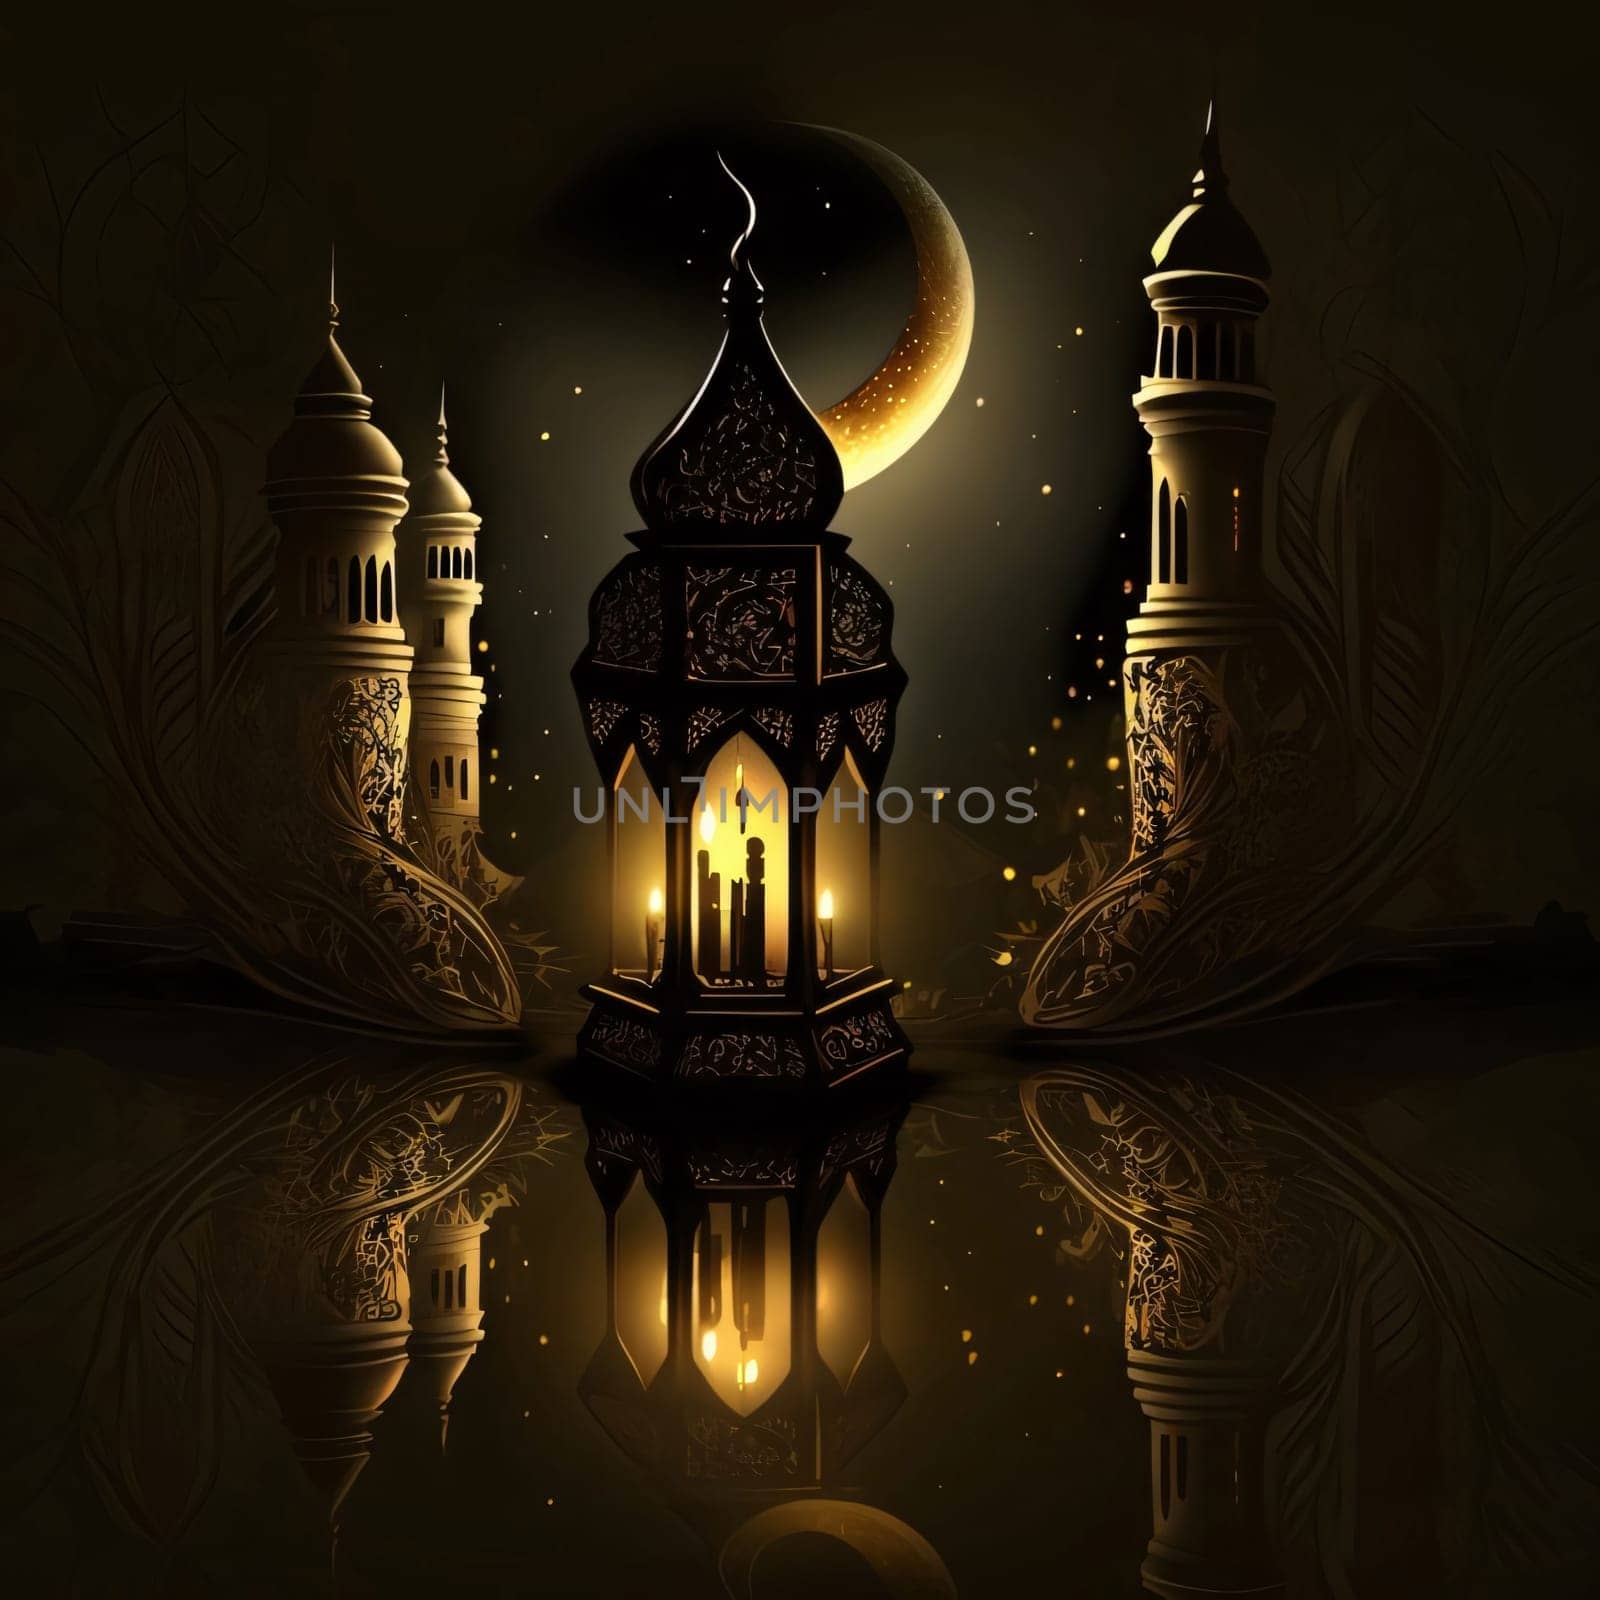 Burning lantern around the towers of minarets in the background Crescent mirror image. Lantern as a symbol of Ramadan for Muslims. A time to meet with God.